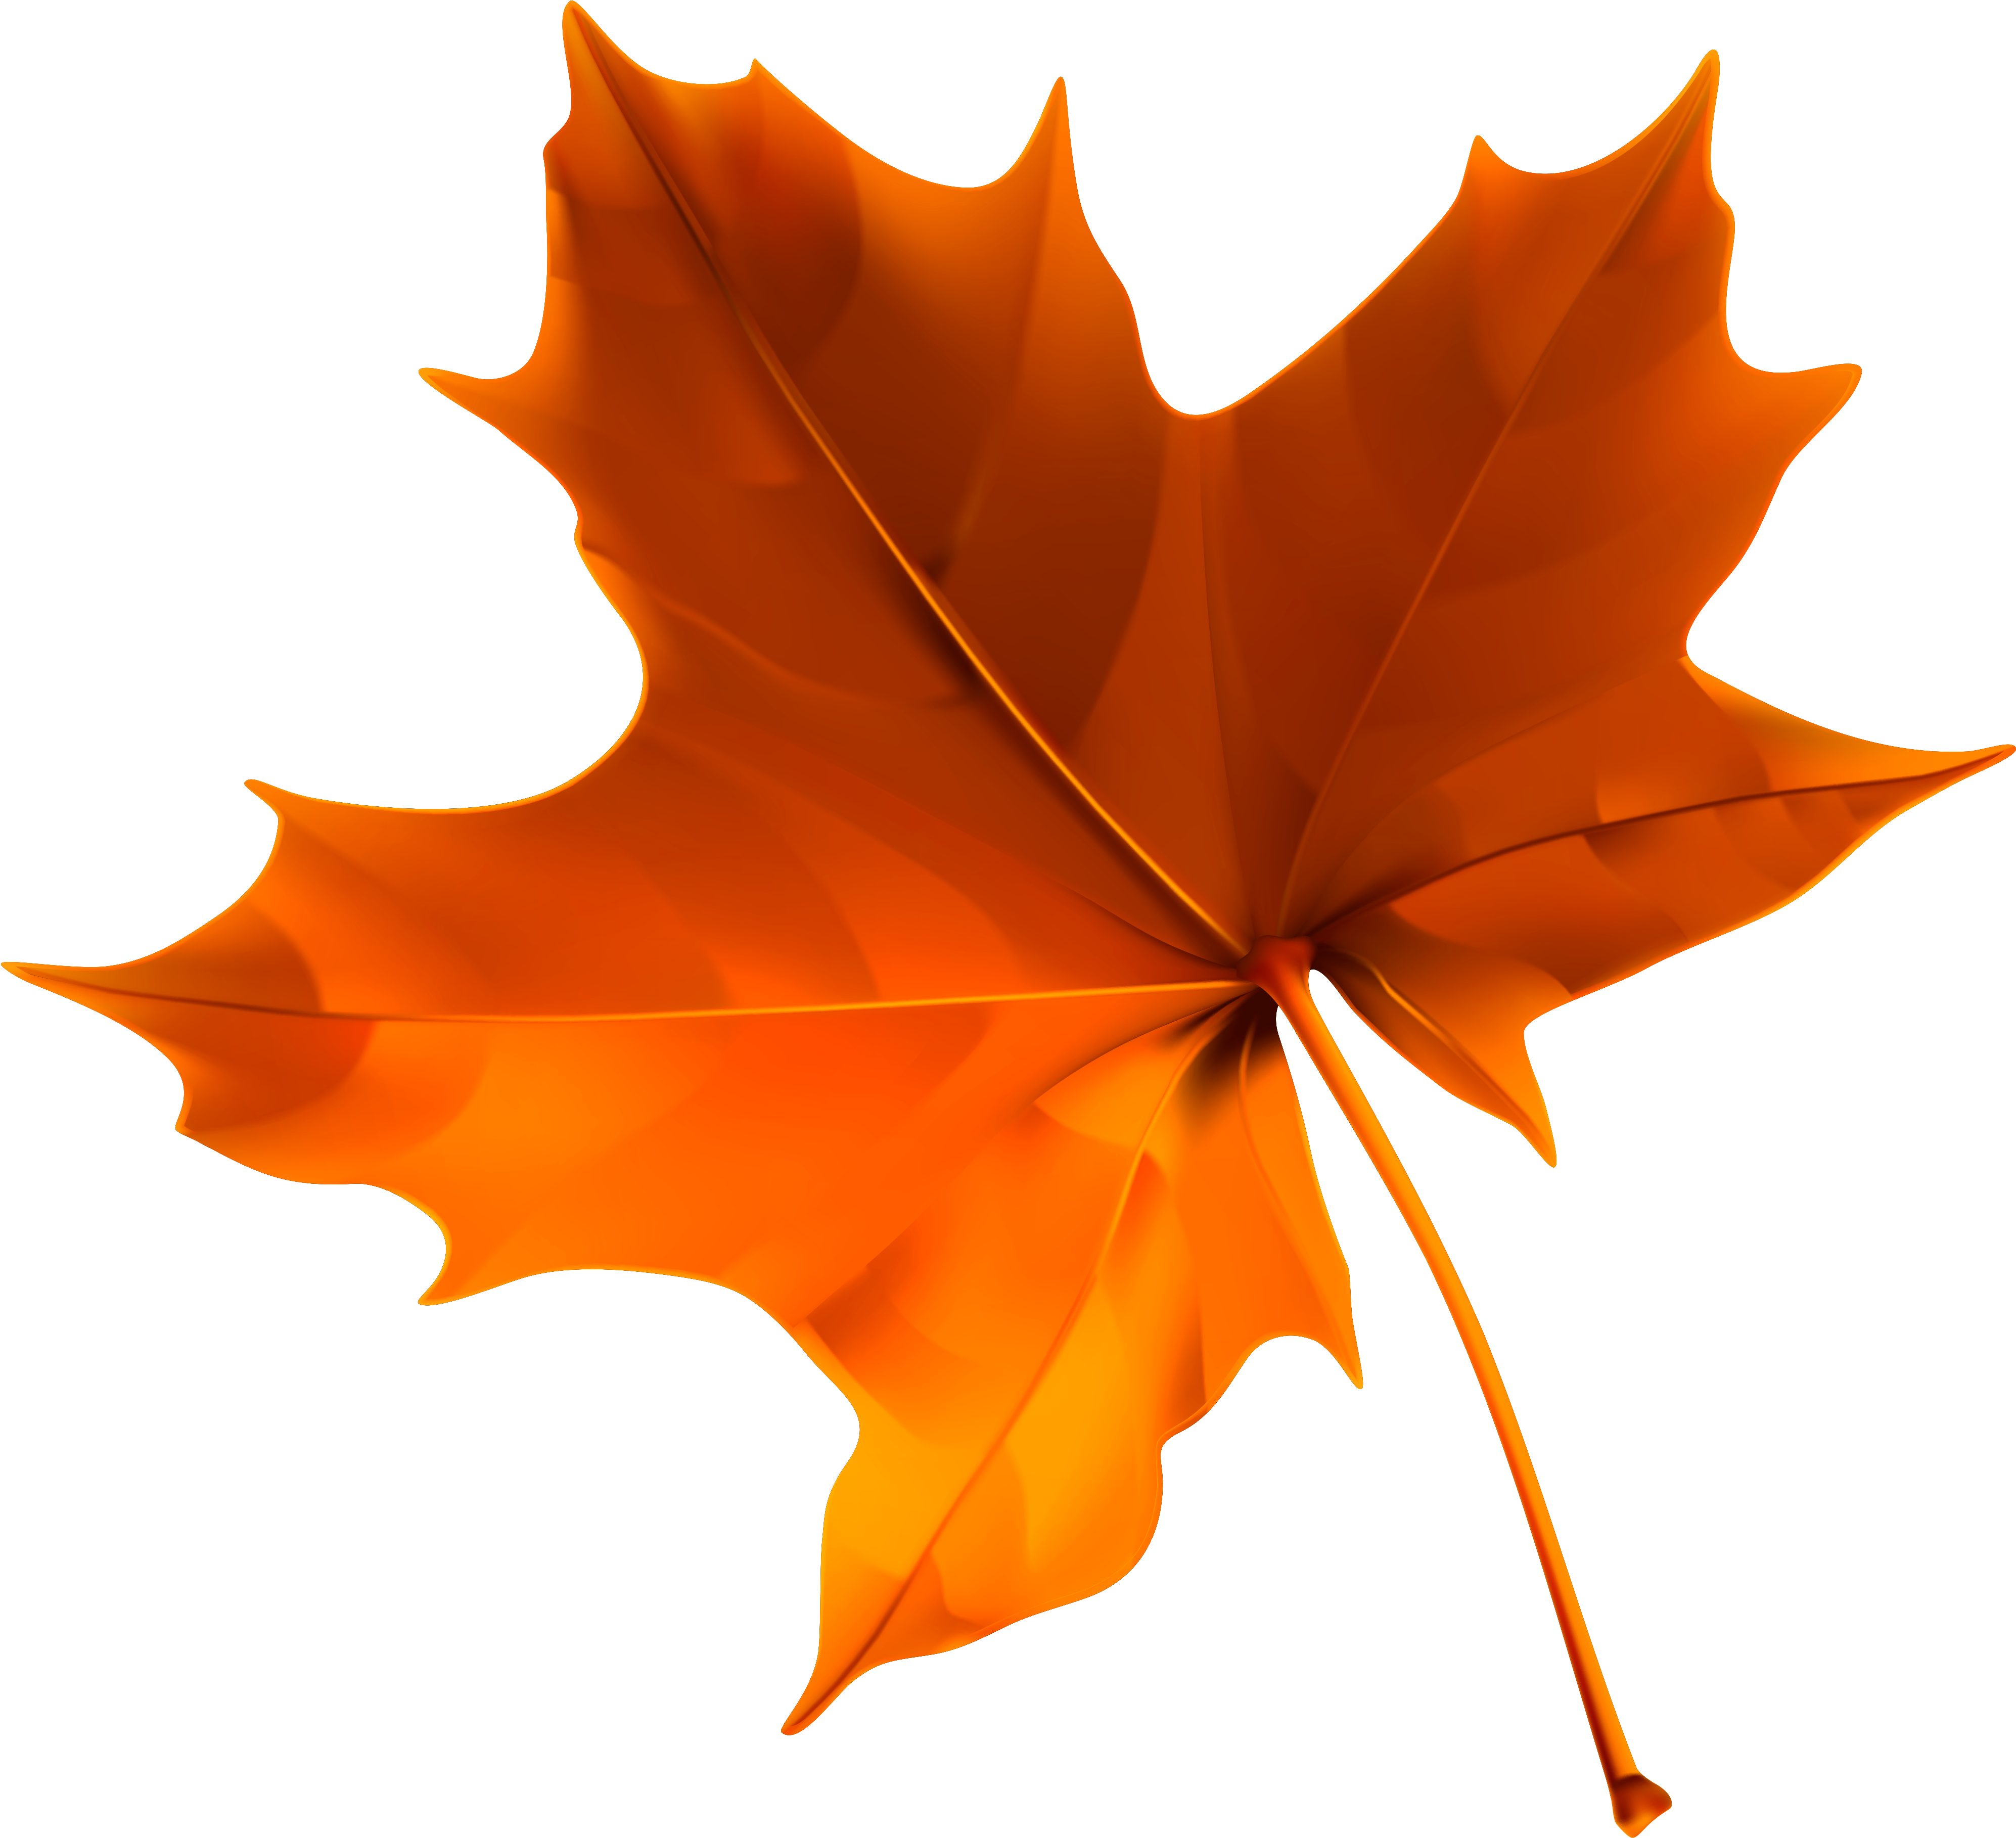 Fall Leaves PNG Images HD